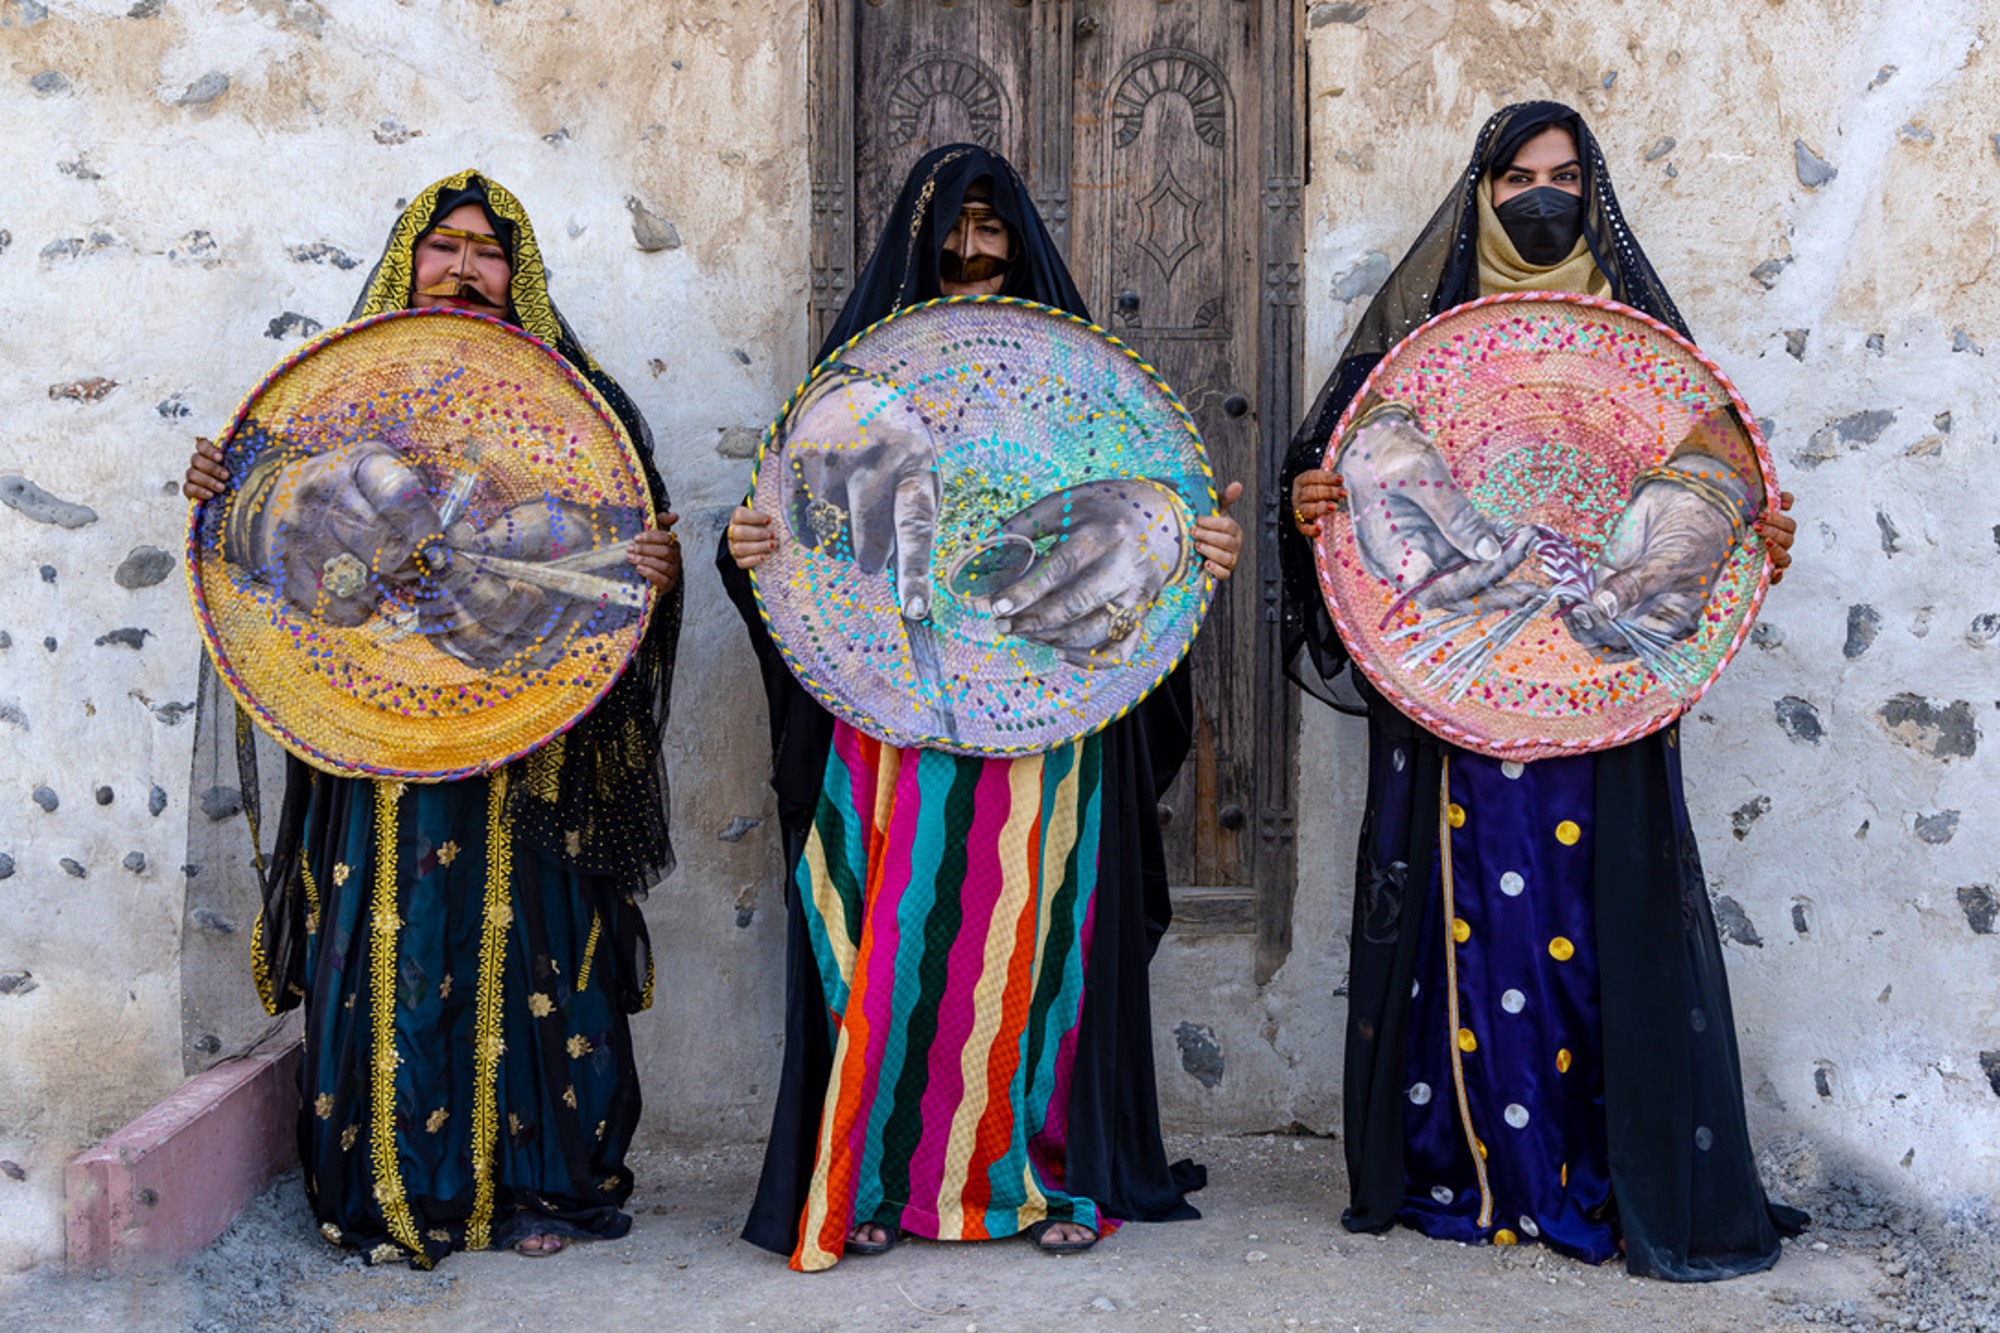 Bil Yad (By Hand) paintings on woven palm frond bases by Dubai-based visual artist Perry El-Ashmawi in Ras Al Khaimah. (Photo: Marisa Engelbrecht)